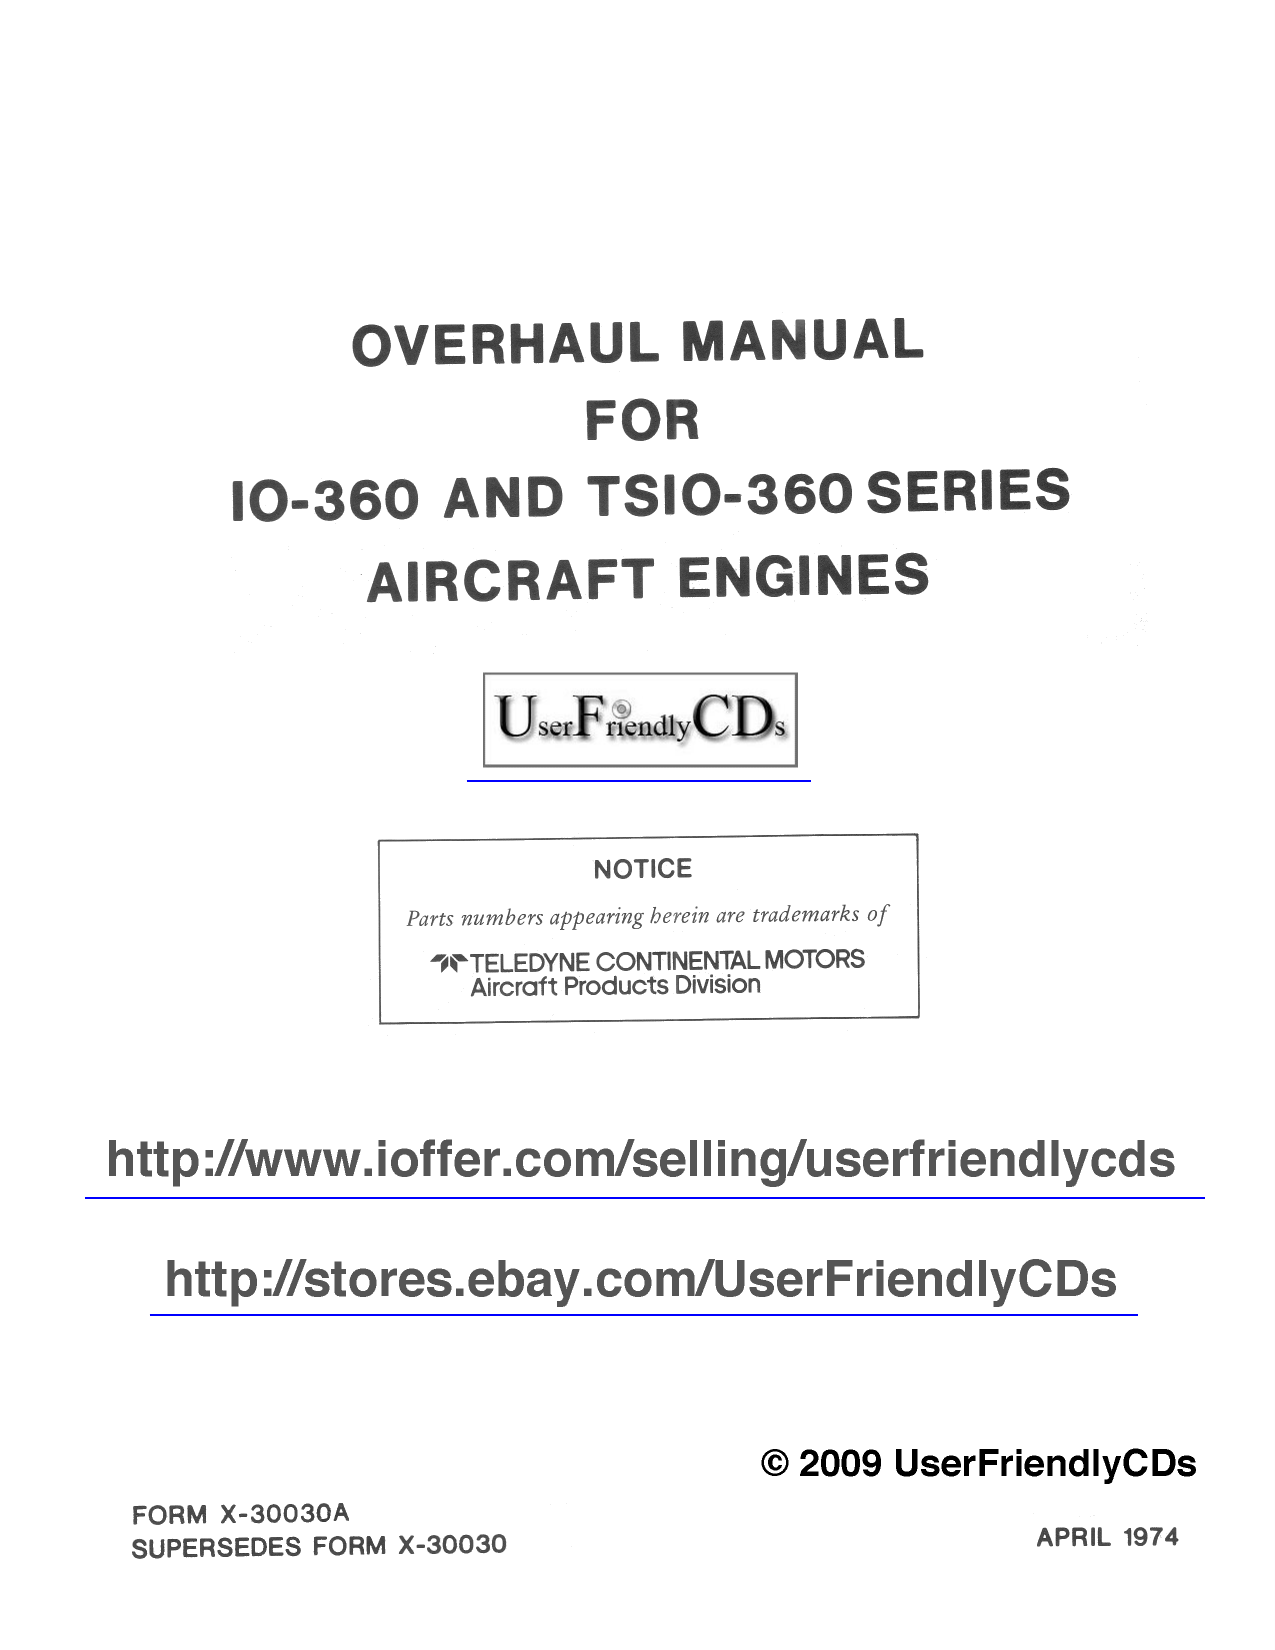 Continental IO-360-A, IO-360-B, IO-360-C, IO-360-D, TSIO-360-A, TSIO-360-B, TSIO-360-C, TSIO-360-D aircraft engine overhaul manual Preview image 6